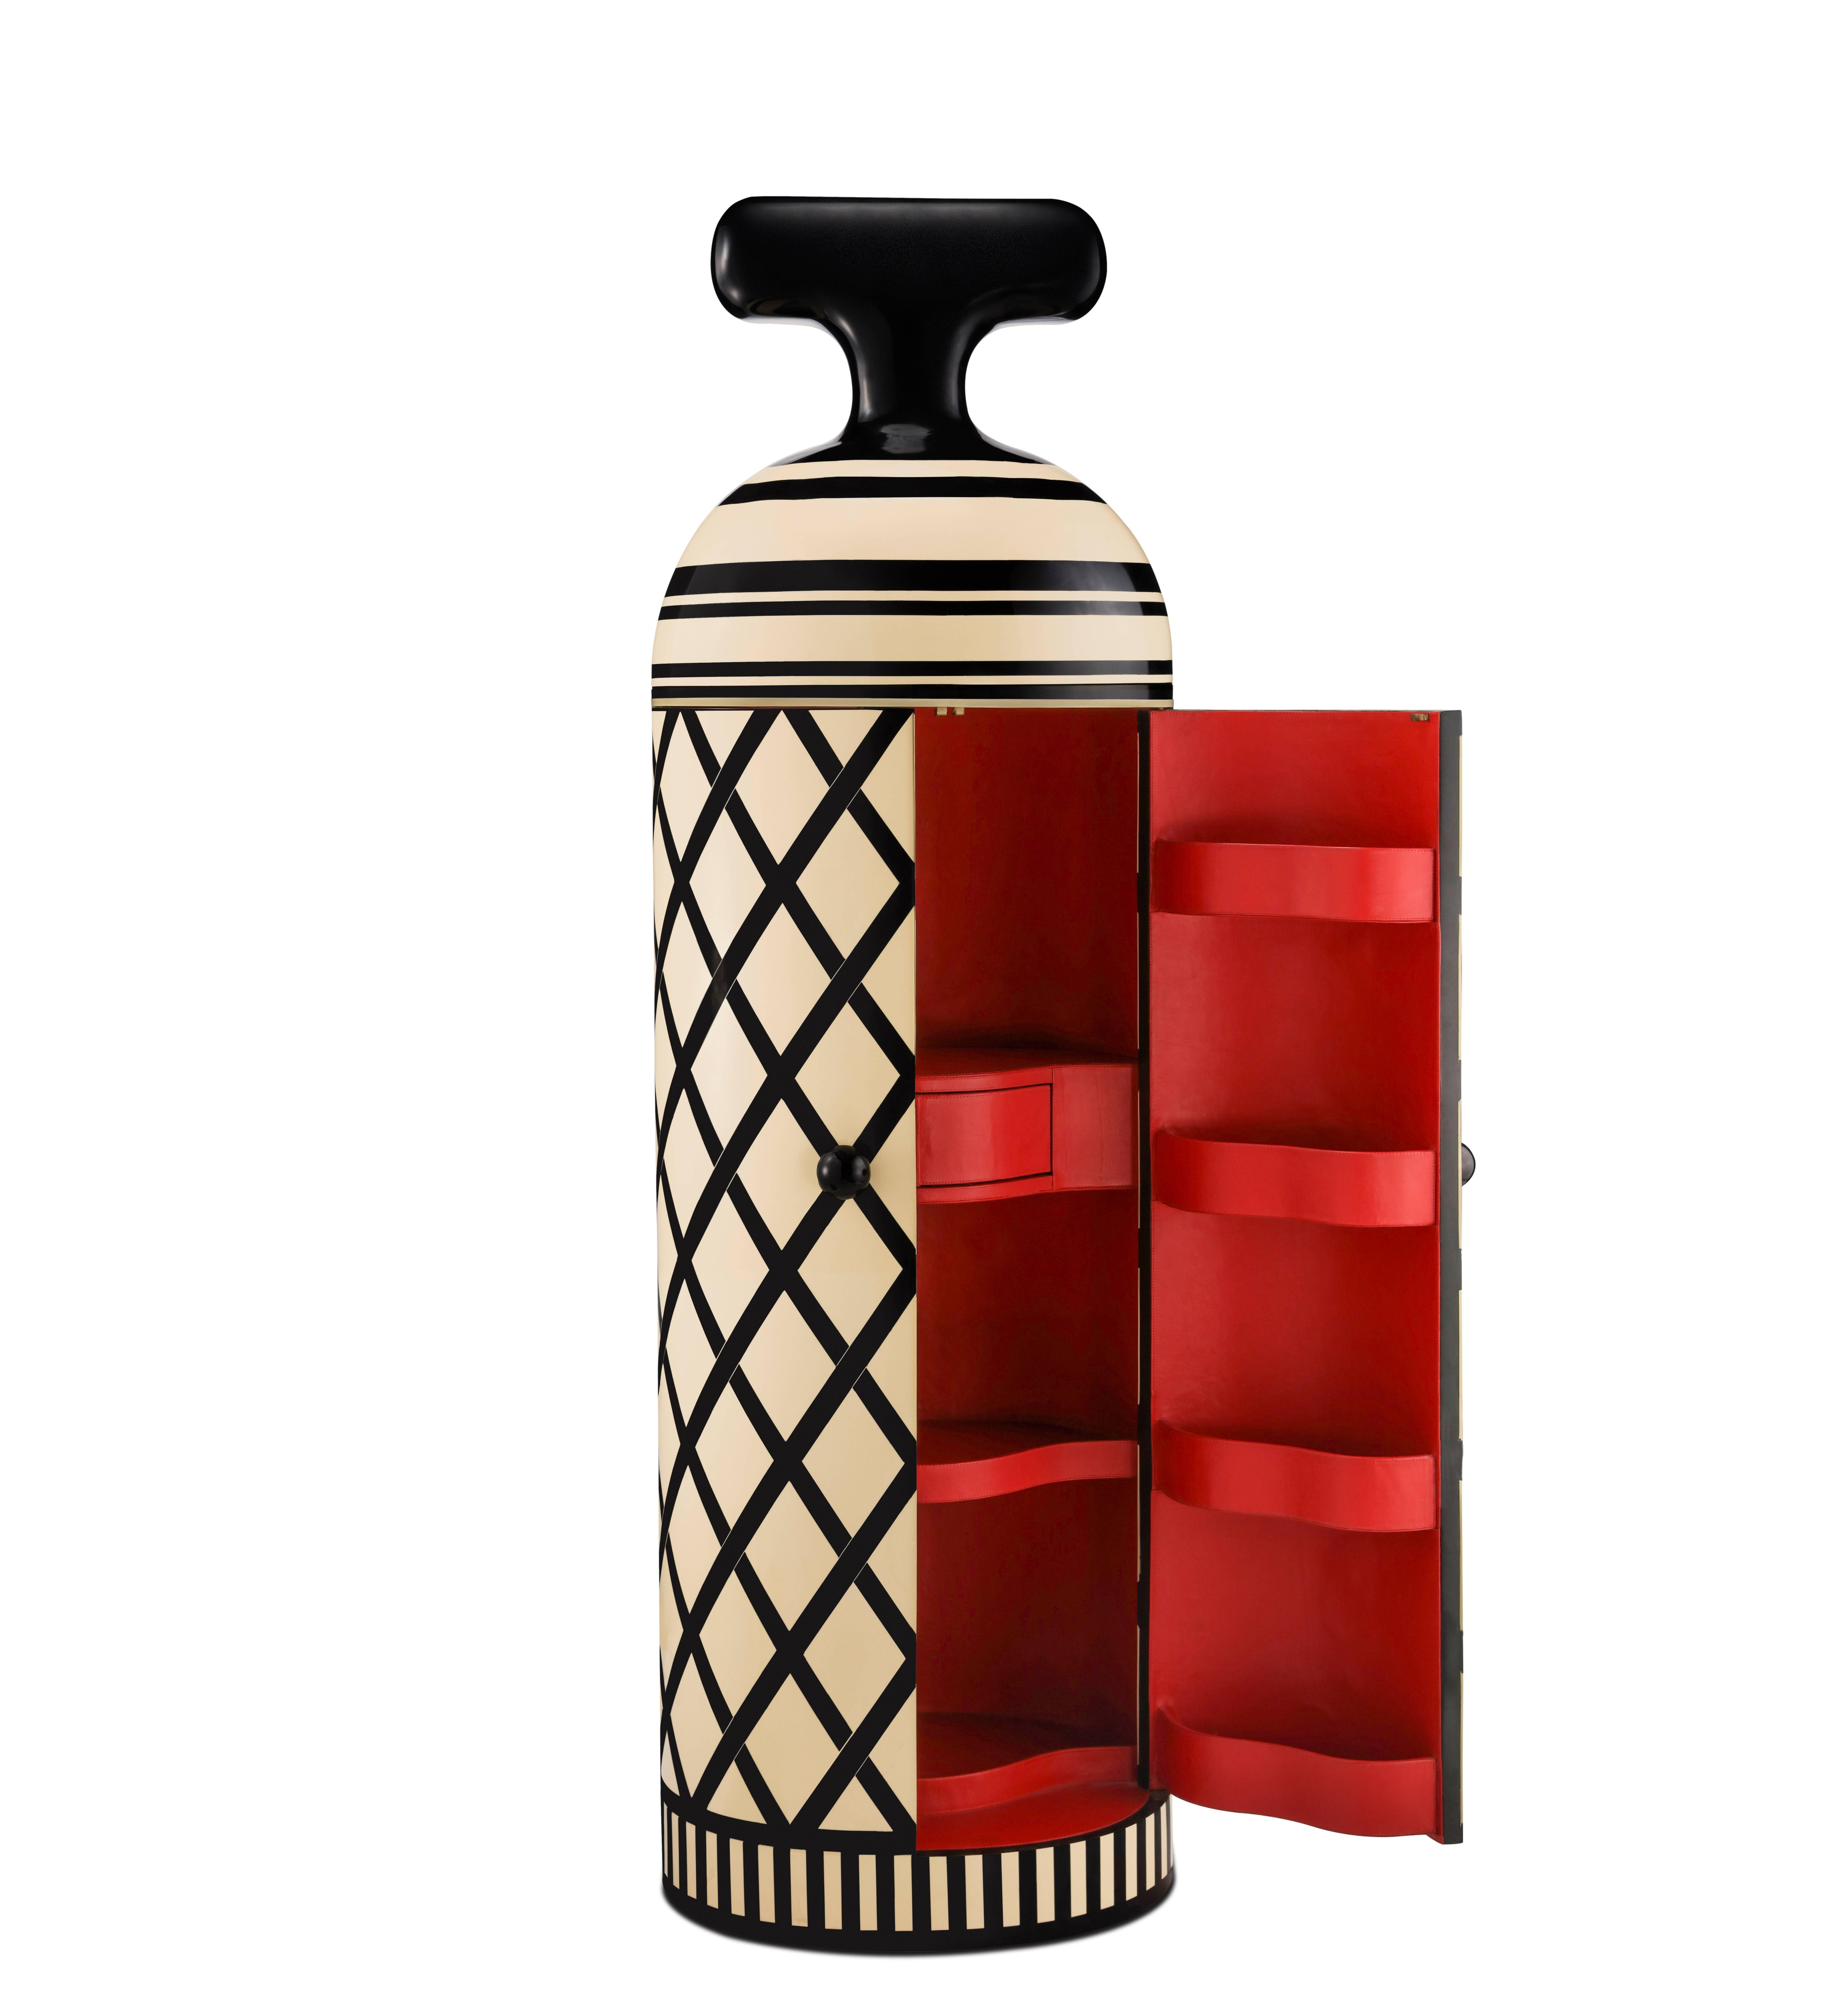 Monsieur Verdoux is an amazing cabinet, with fine leather interiors, designed to hold a full bar

Vanilla Noir is Scarlet Splendour’s debut collection designed by Italian designer Matteo Cibic.

The furniture collection is inspired by Indian